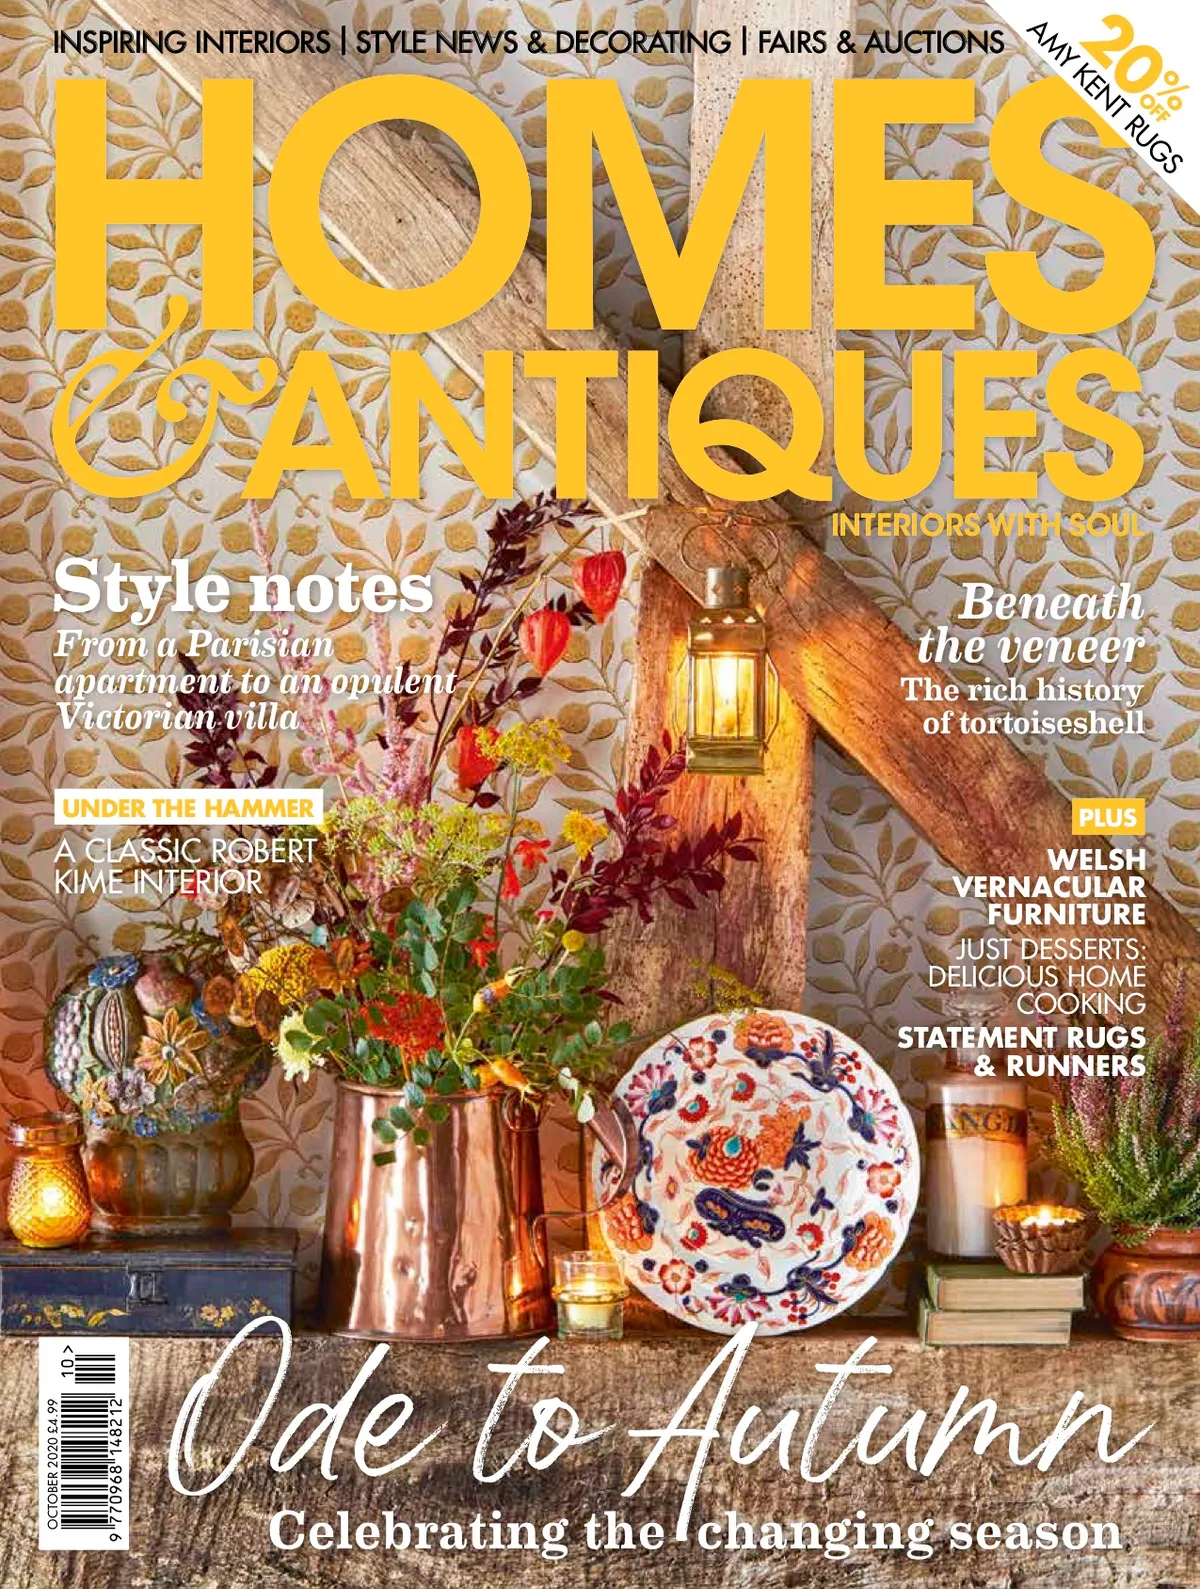 Homes & Antiques October 2020 cover